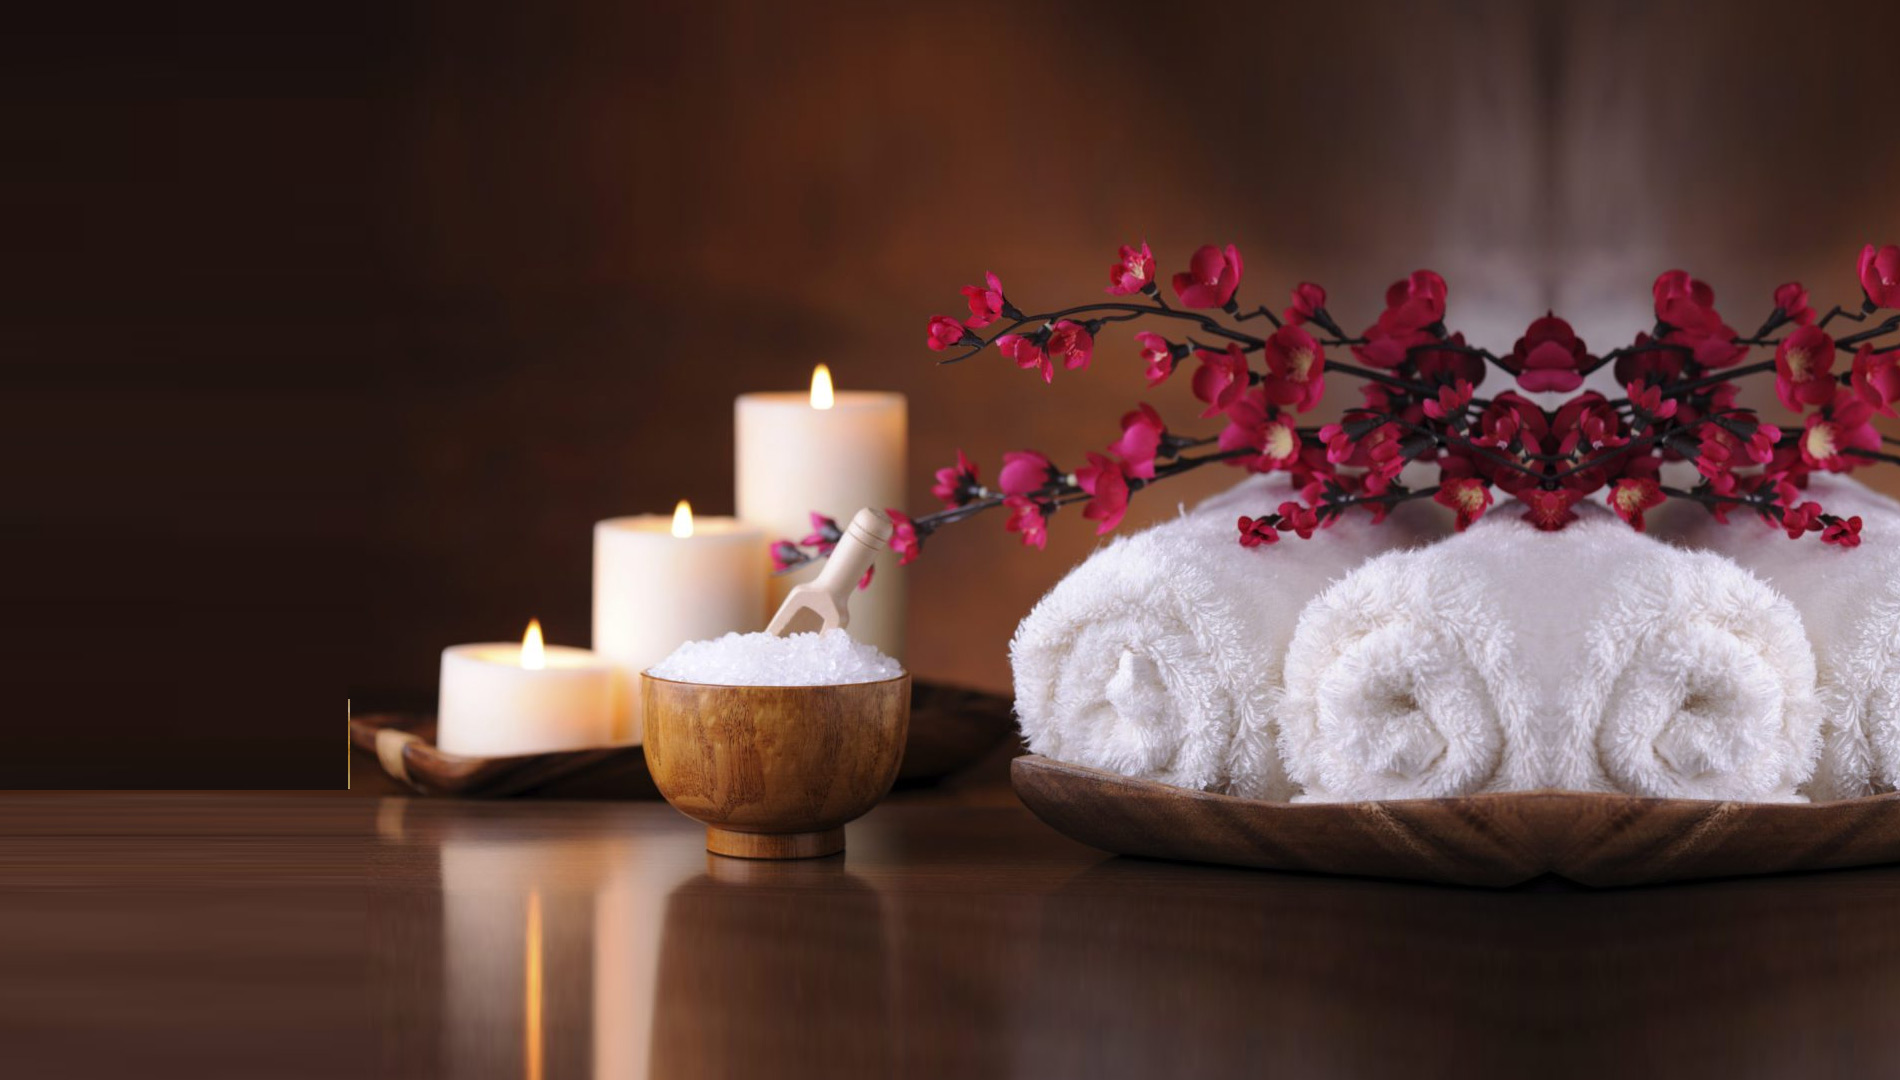 Flowers, towels and candles